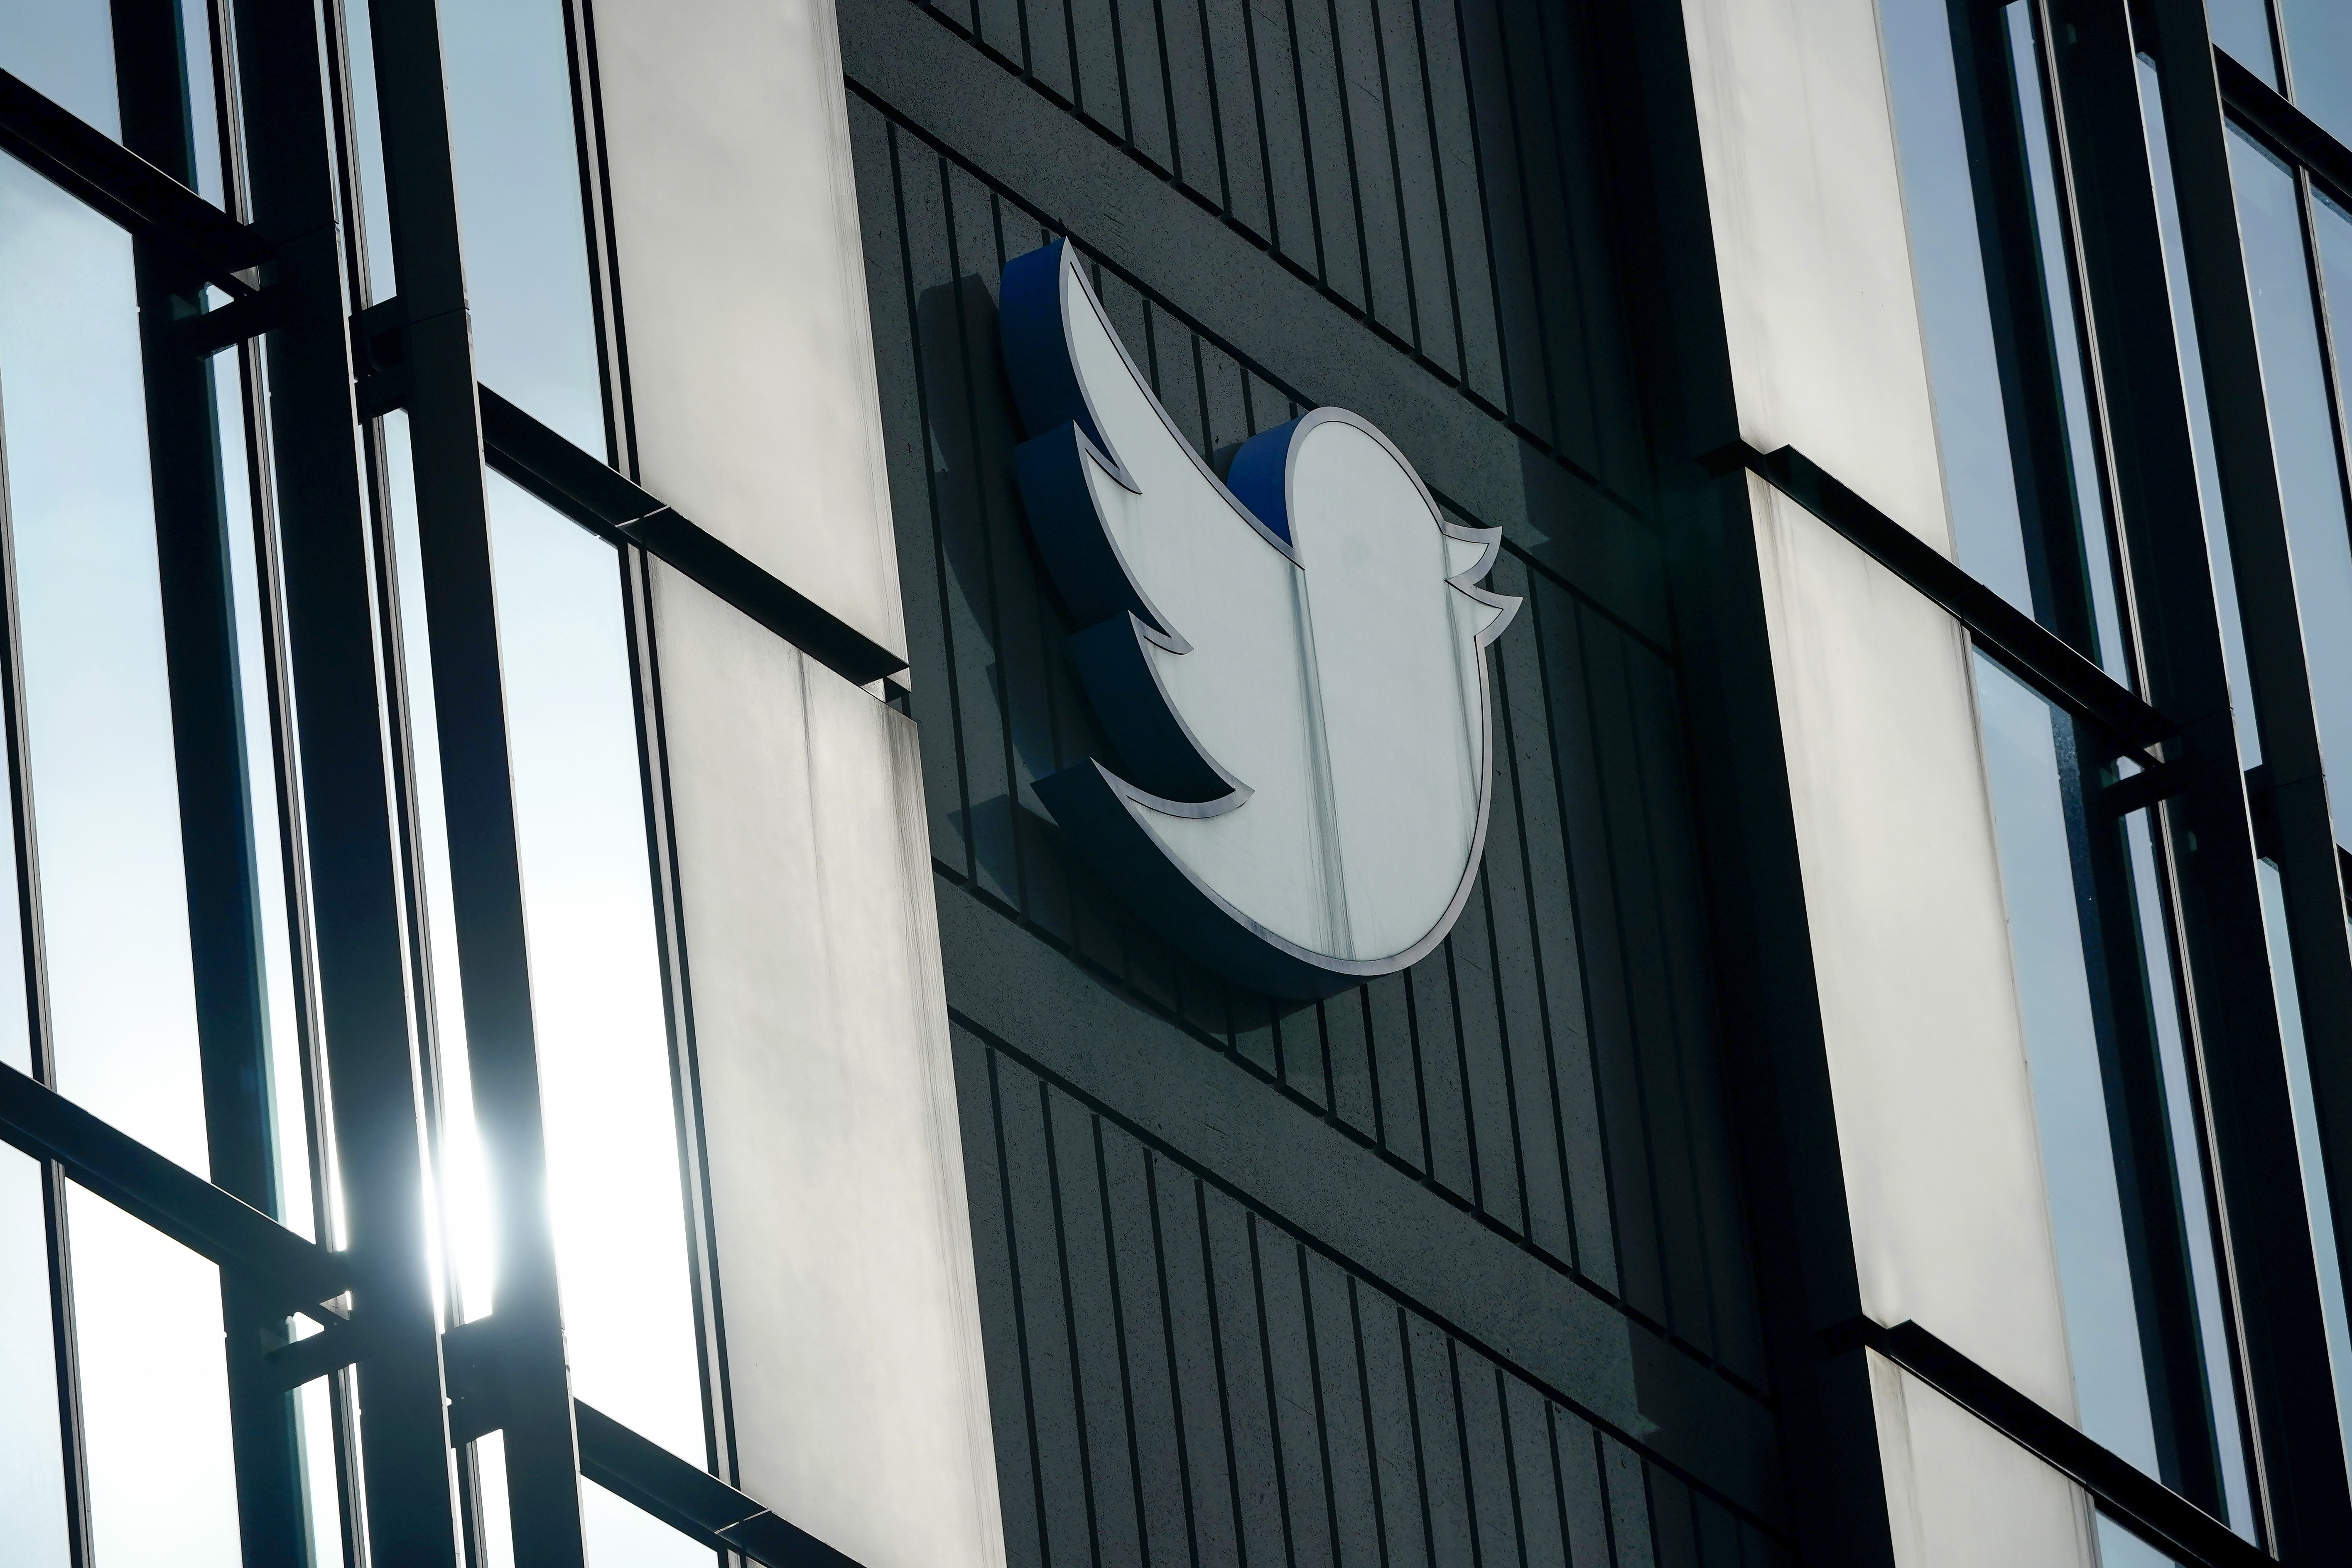 Twitter's next CEO will be a woman, Elon Musk says